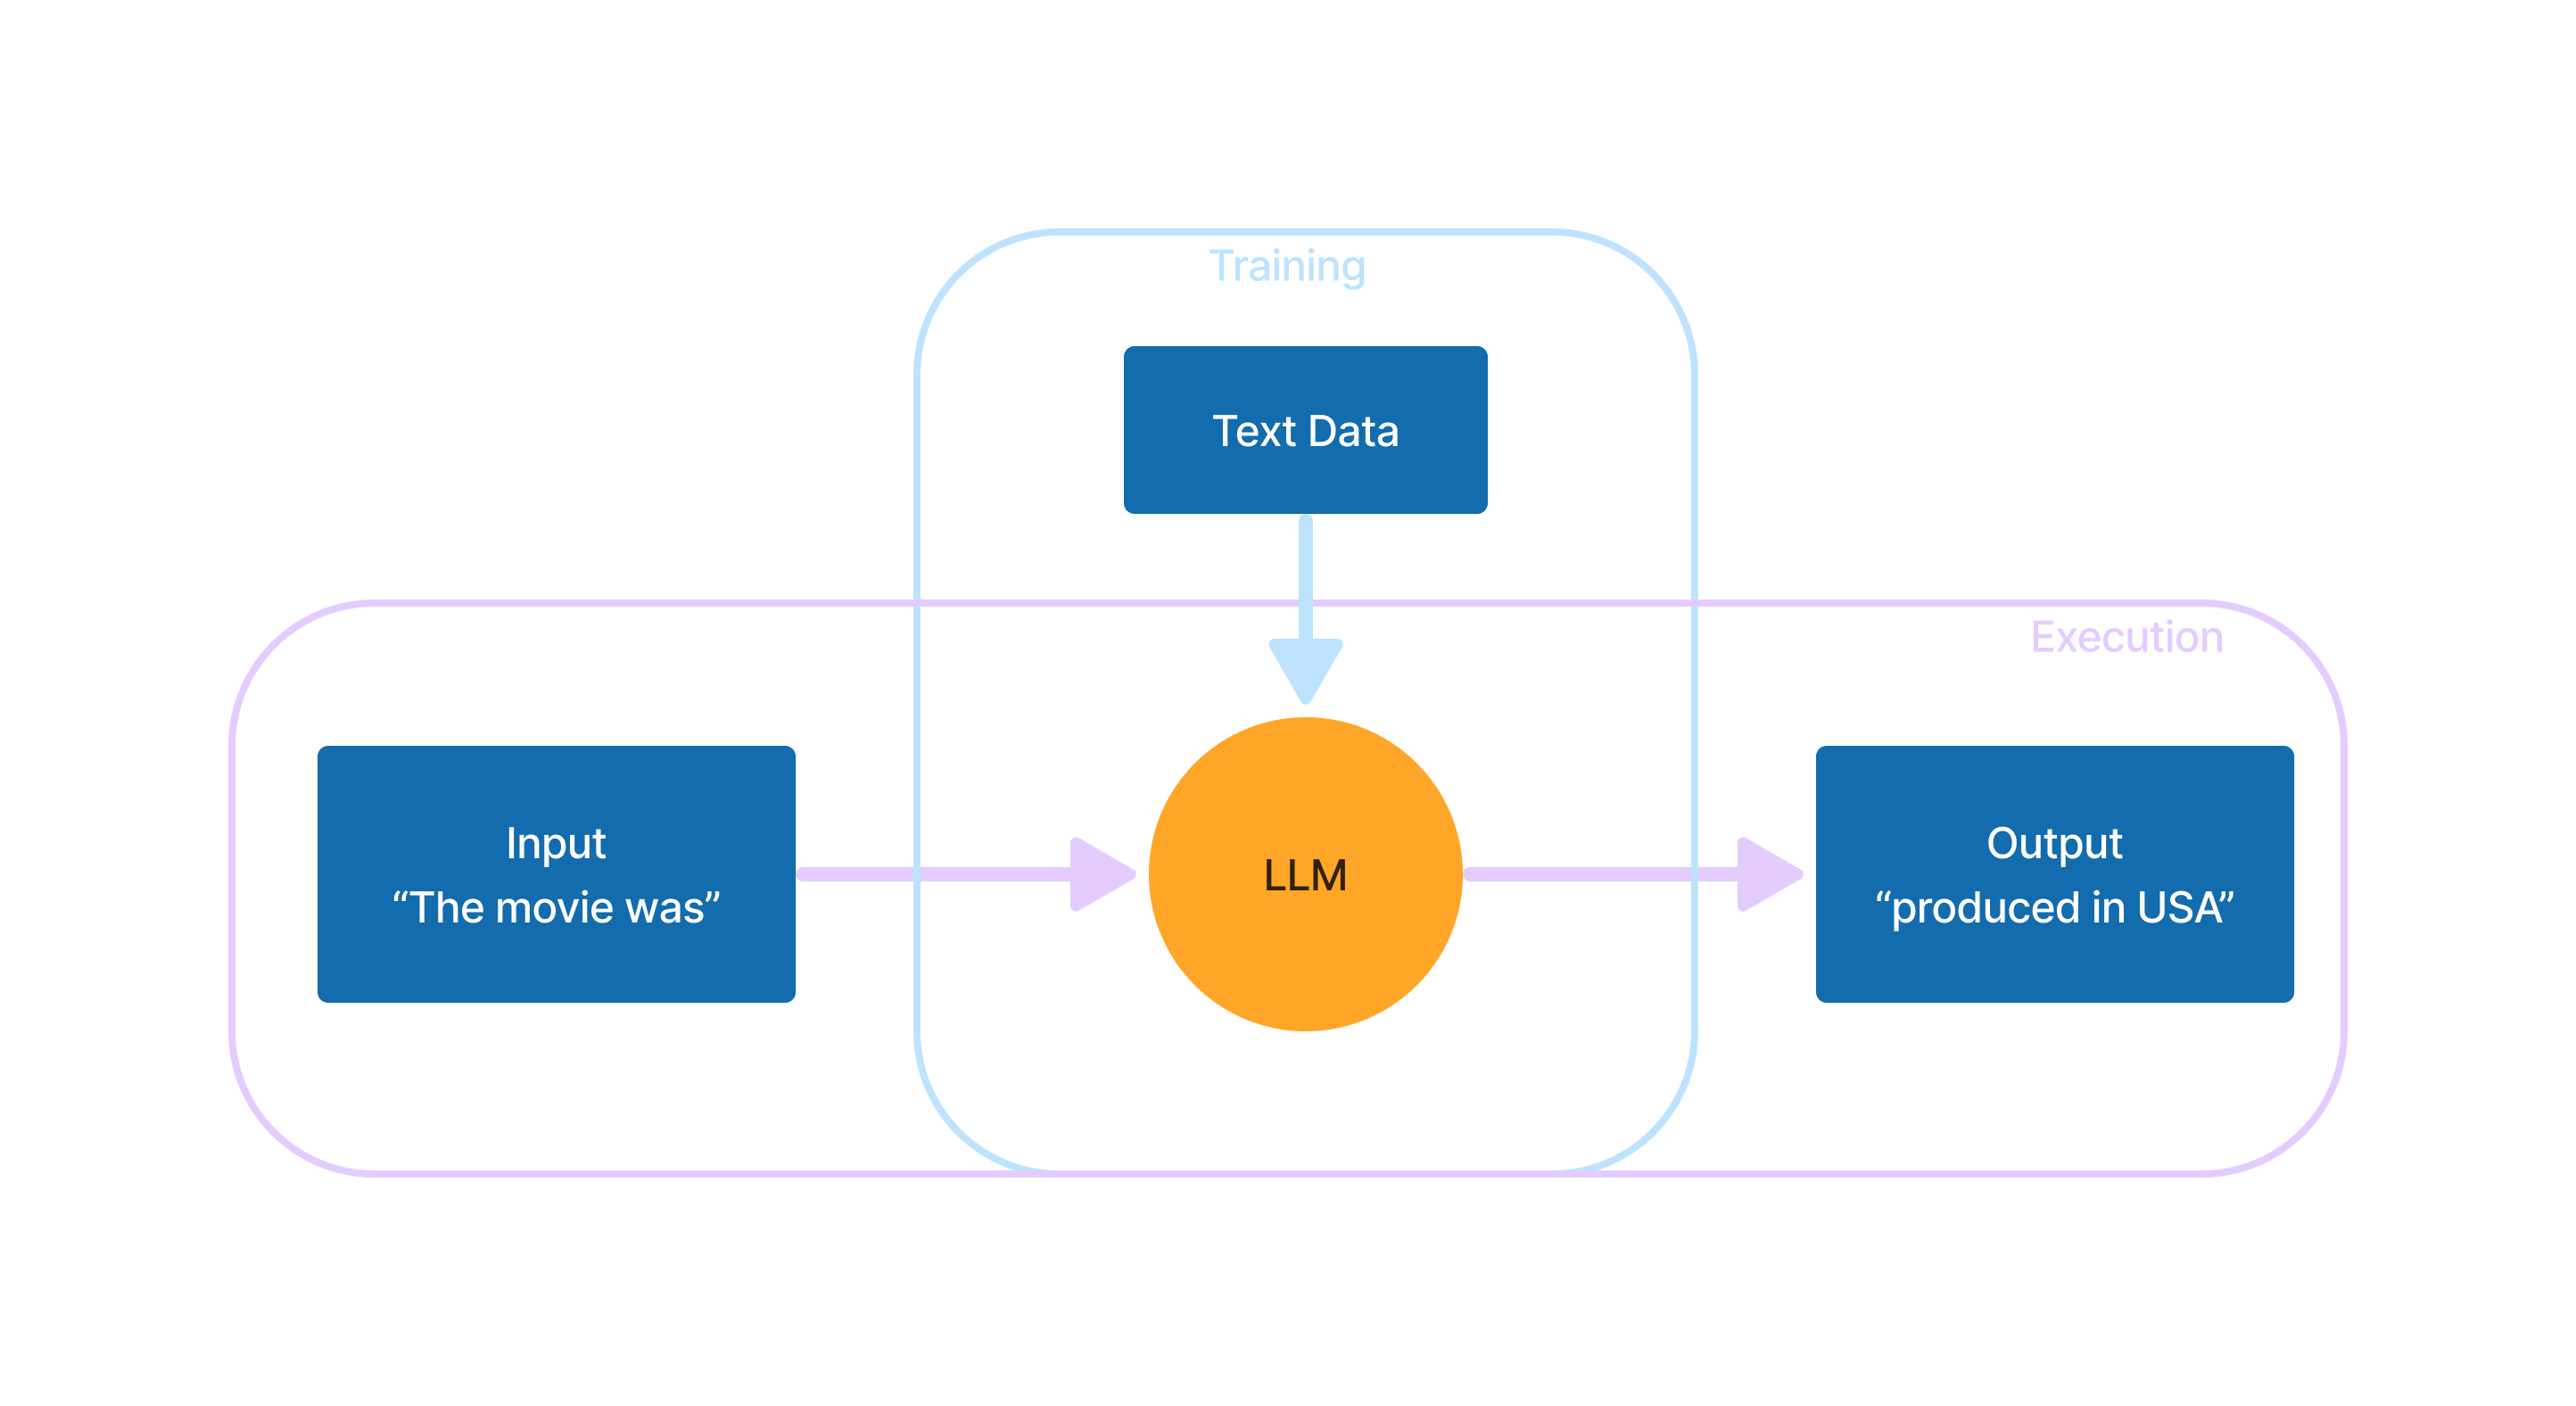 Diagram showing training process - training data fed into LMM, - and an execution process - input provided into LLM, LLM generates output